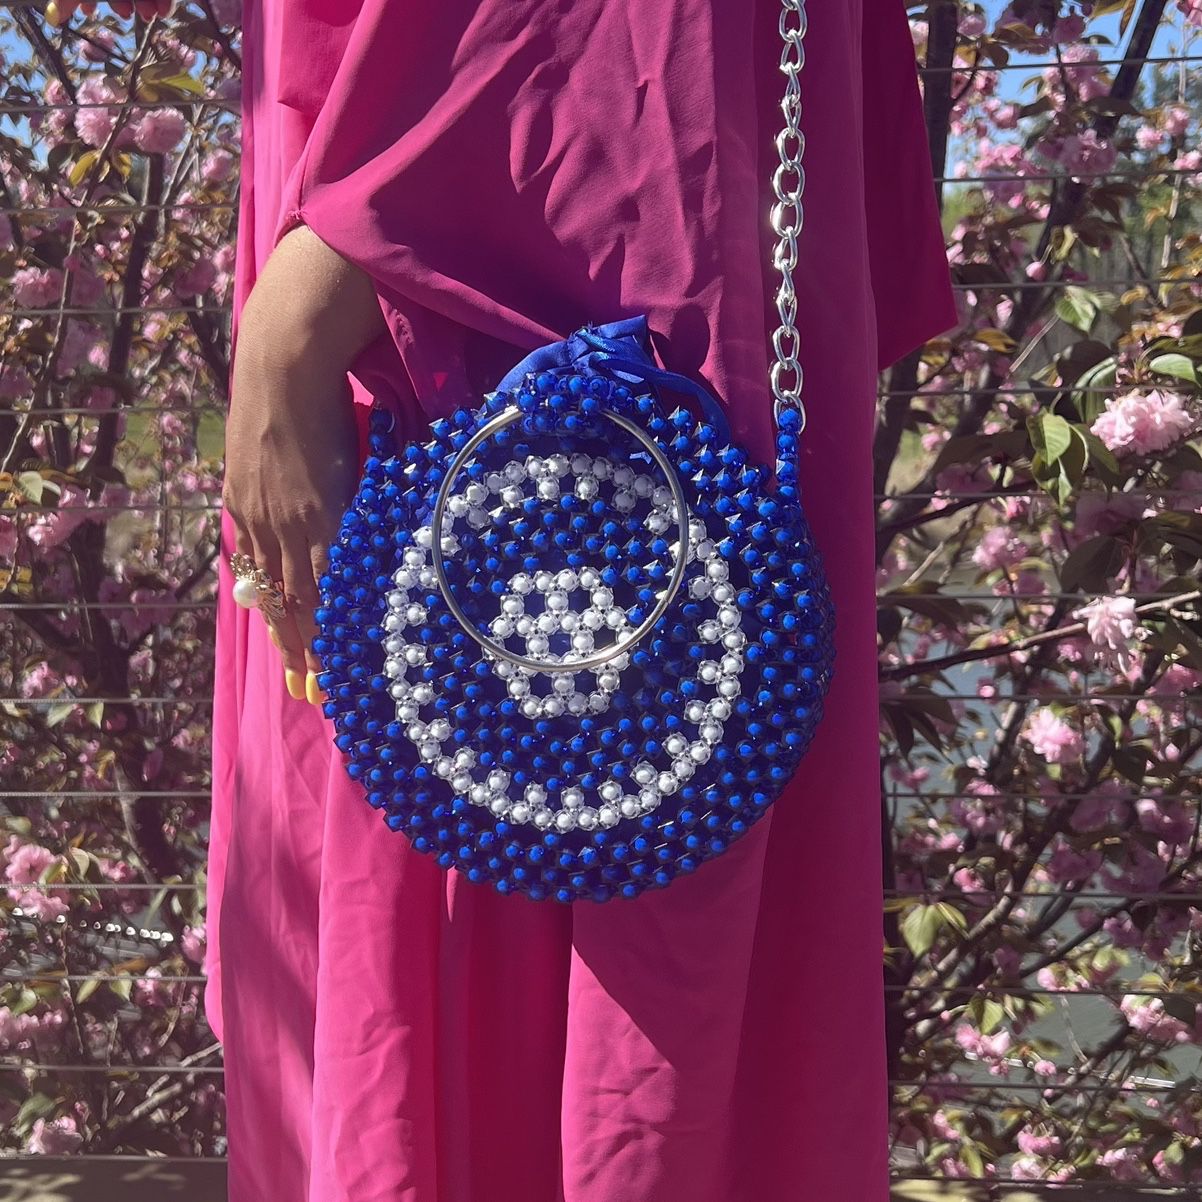 40 Incredible Beaded Bags for Every Occasion - Magnifissance